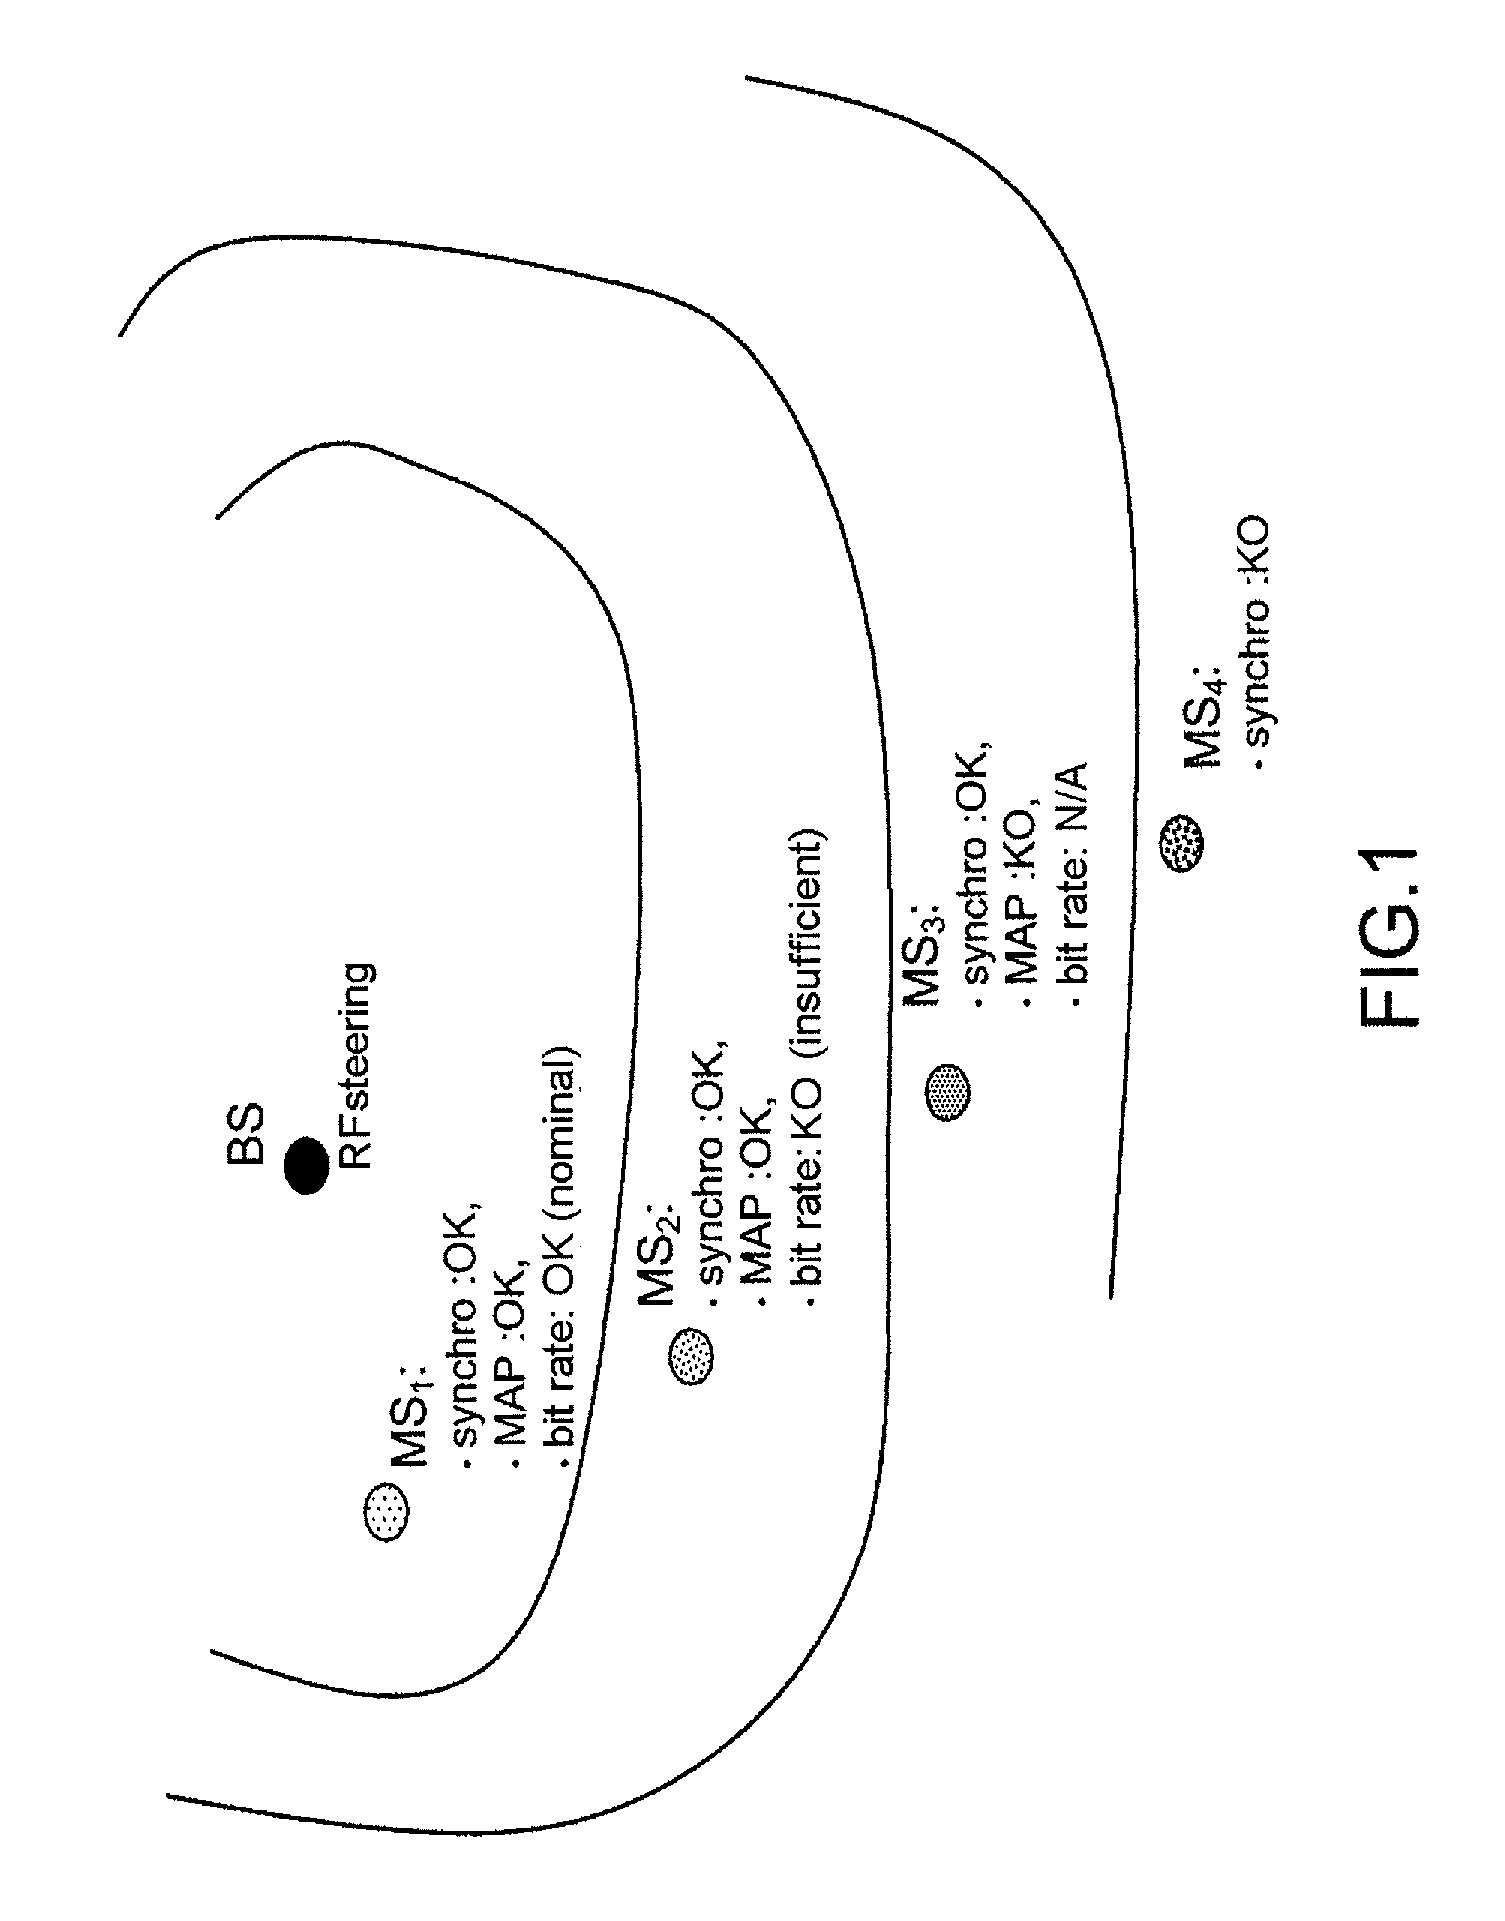 Method for driving smart antennas in a communication network